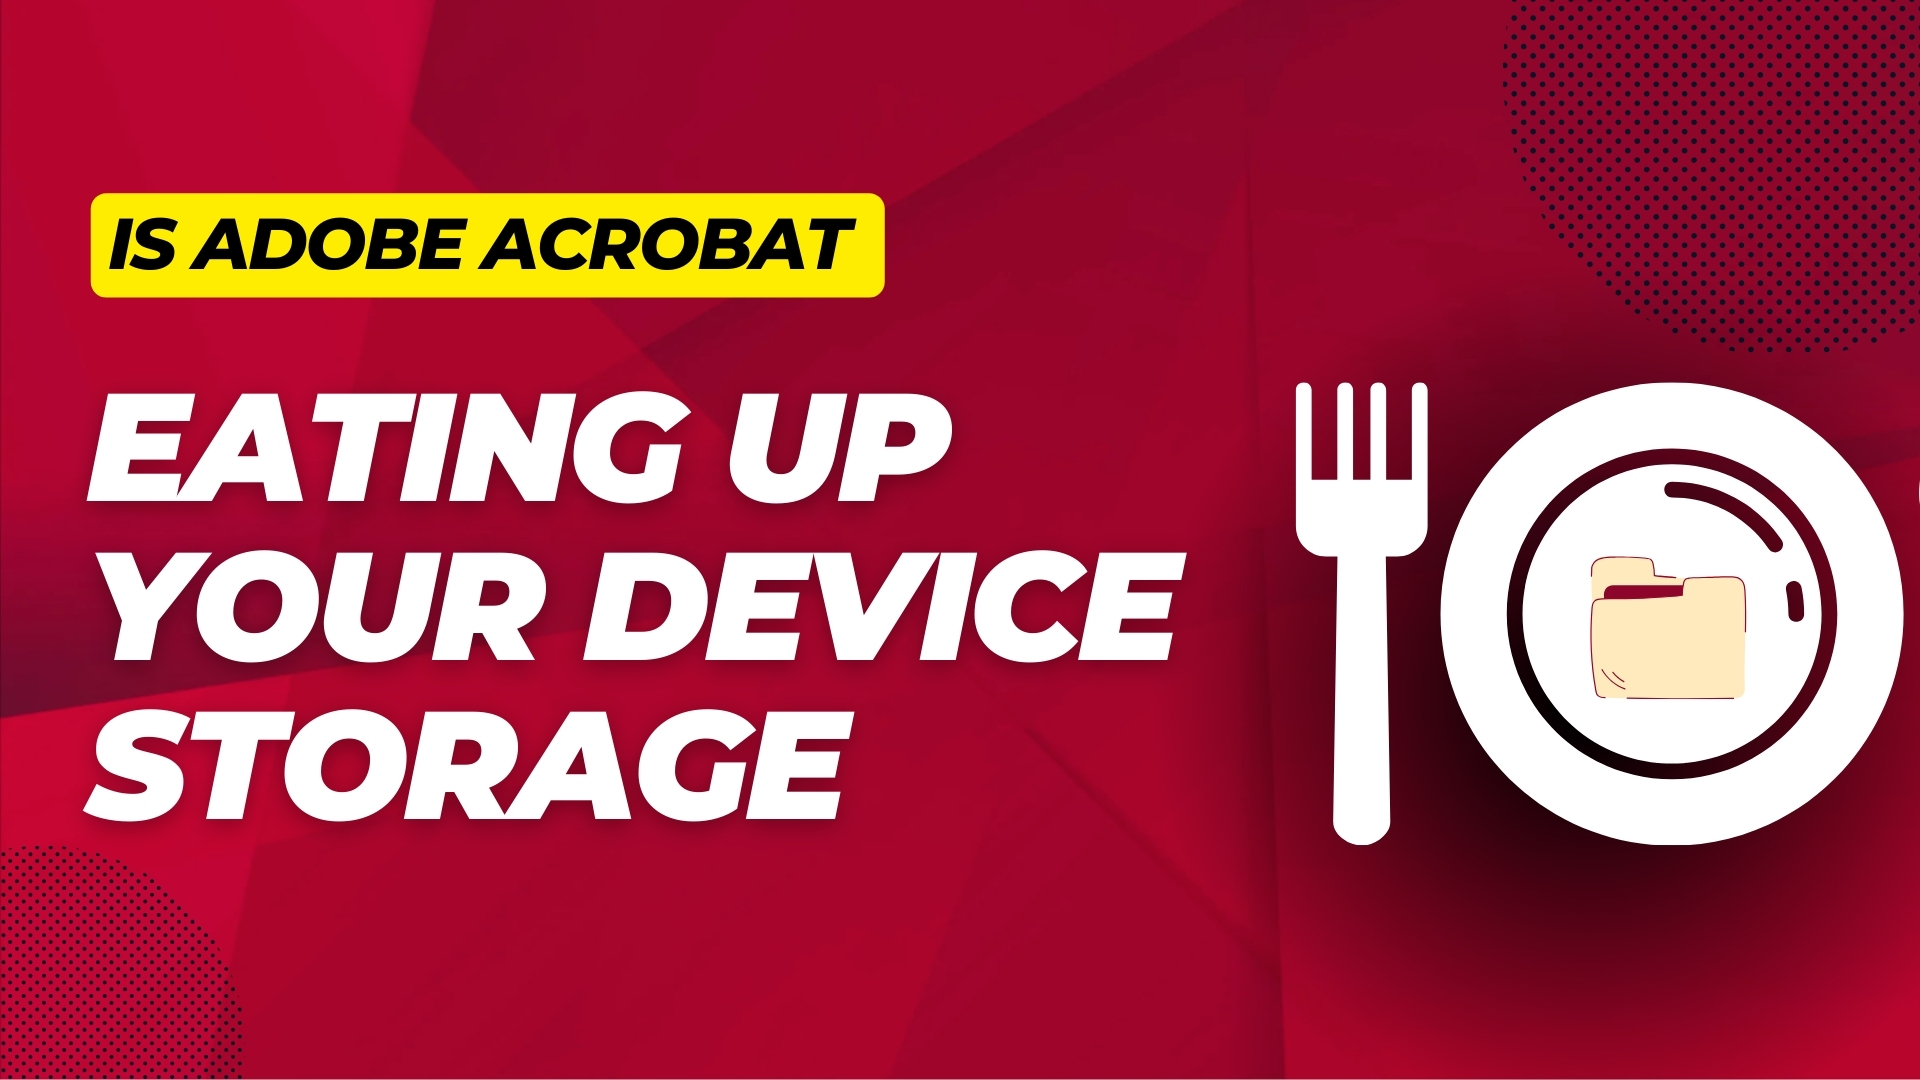 Is Adobe Acrobat Eating Up Your Storage Without You Noticing?